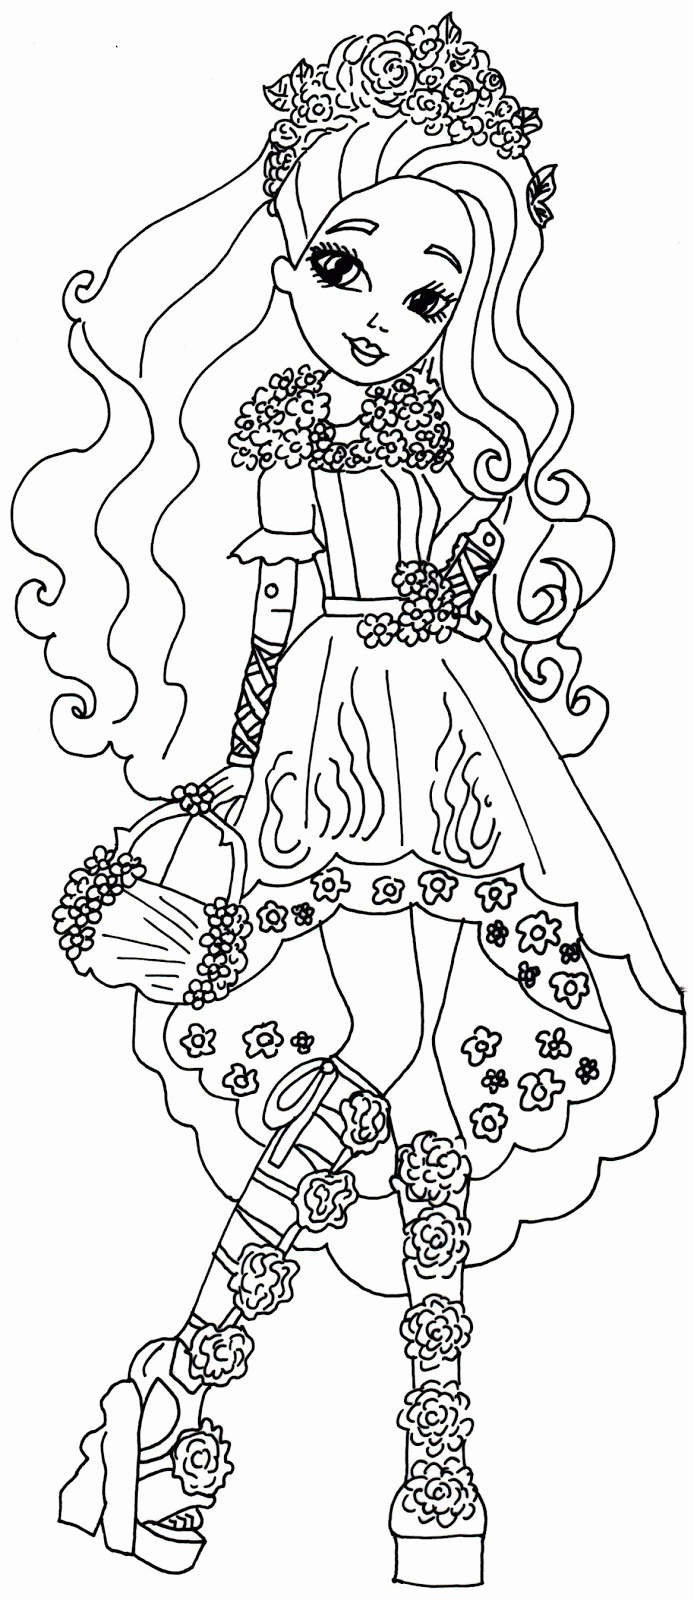 Free Printable Ever After High Coloring Pages: Cedar Wood Spring